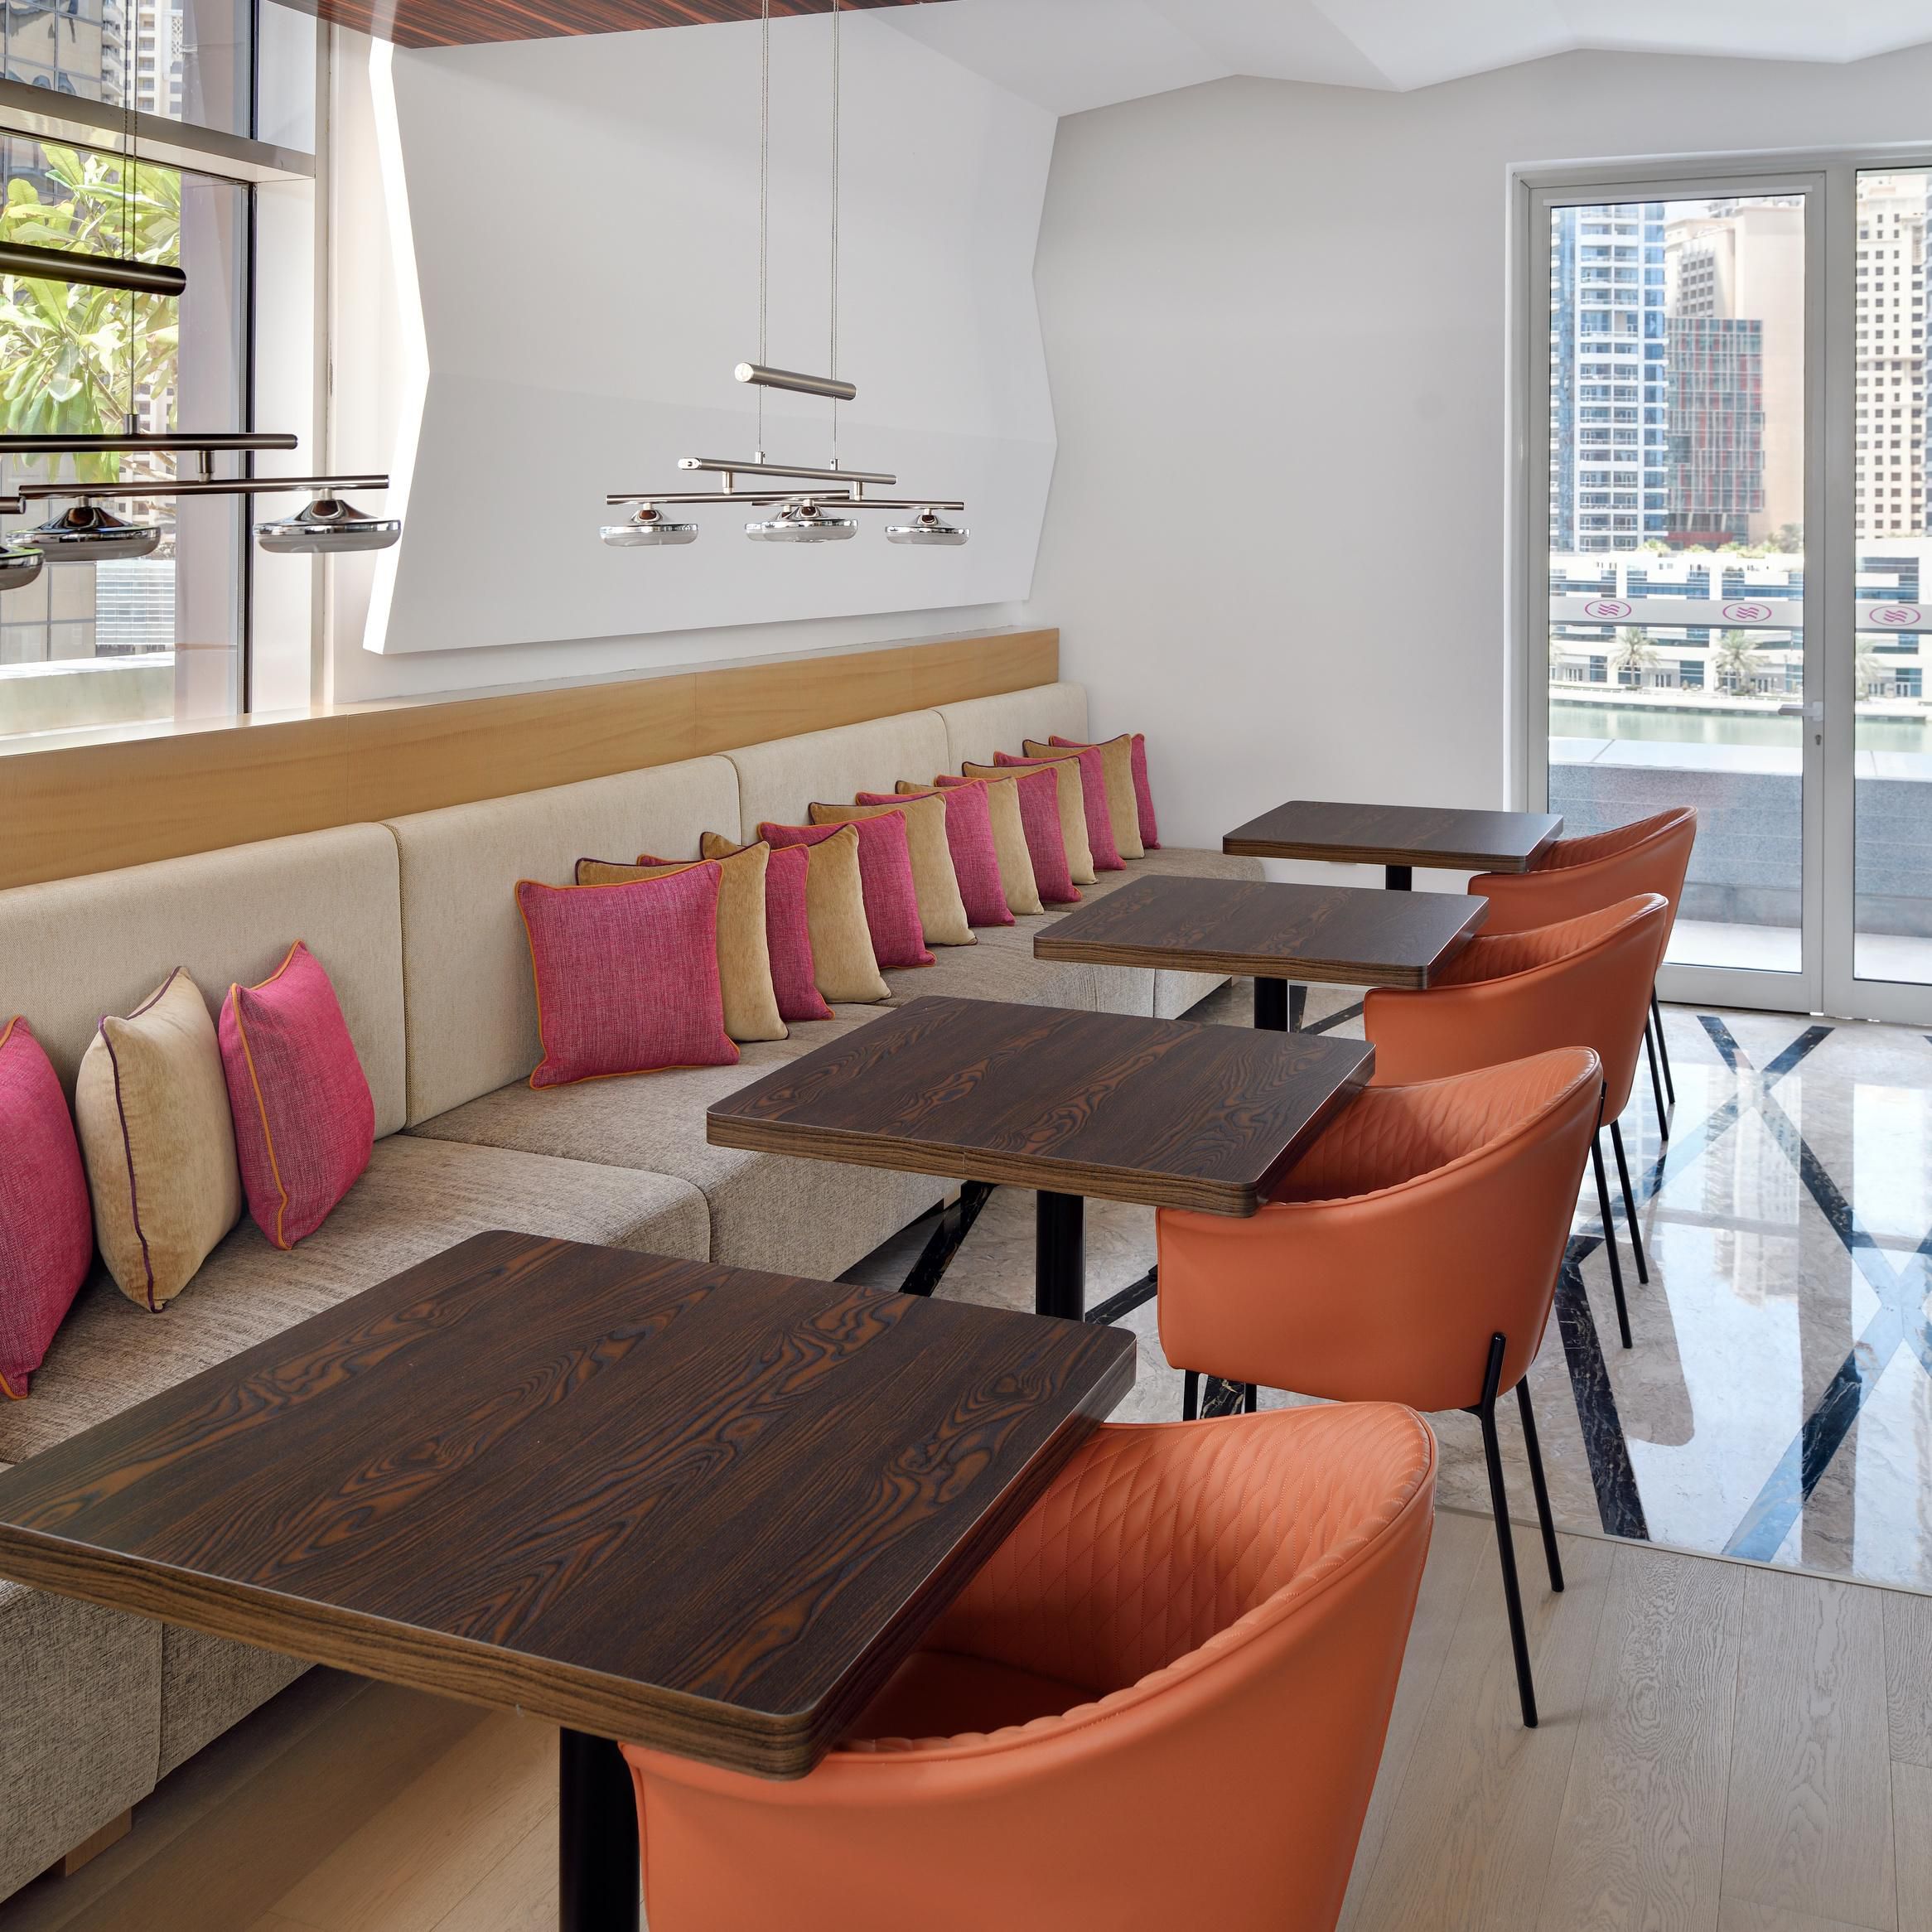 Spacious areas for dining and working with Dubai Marina views